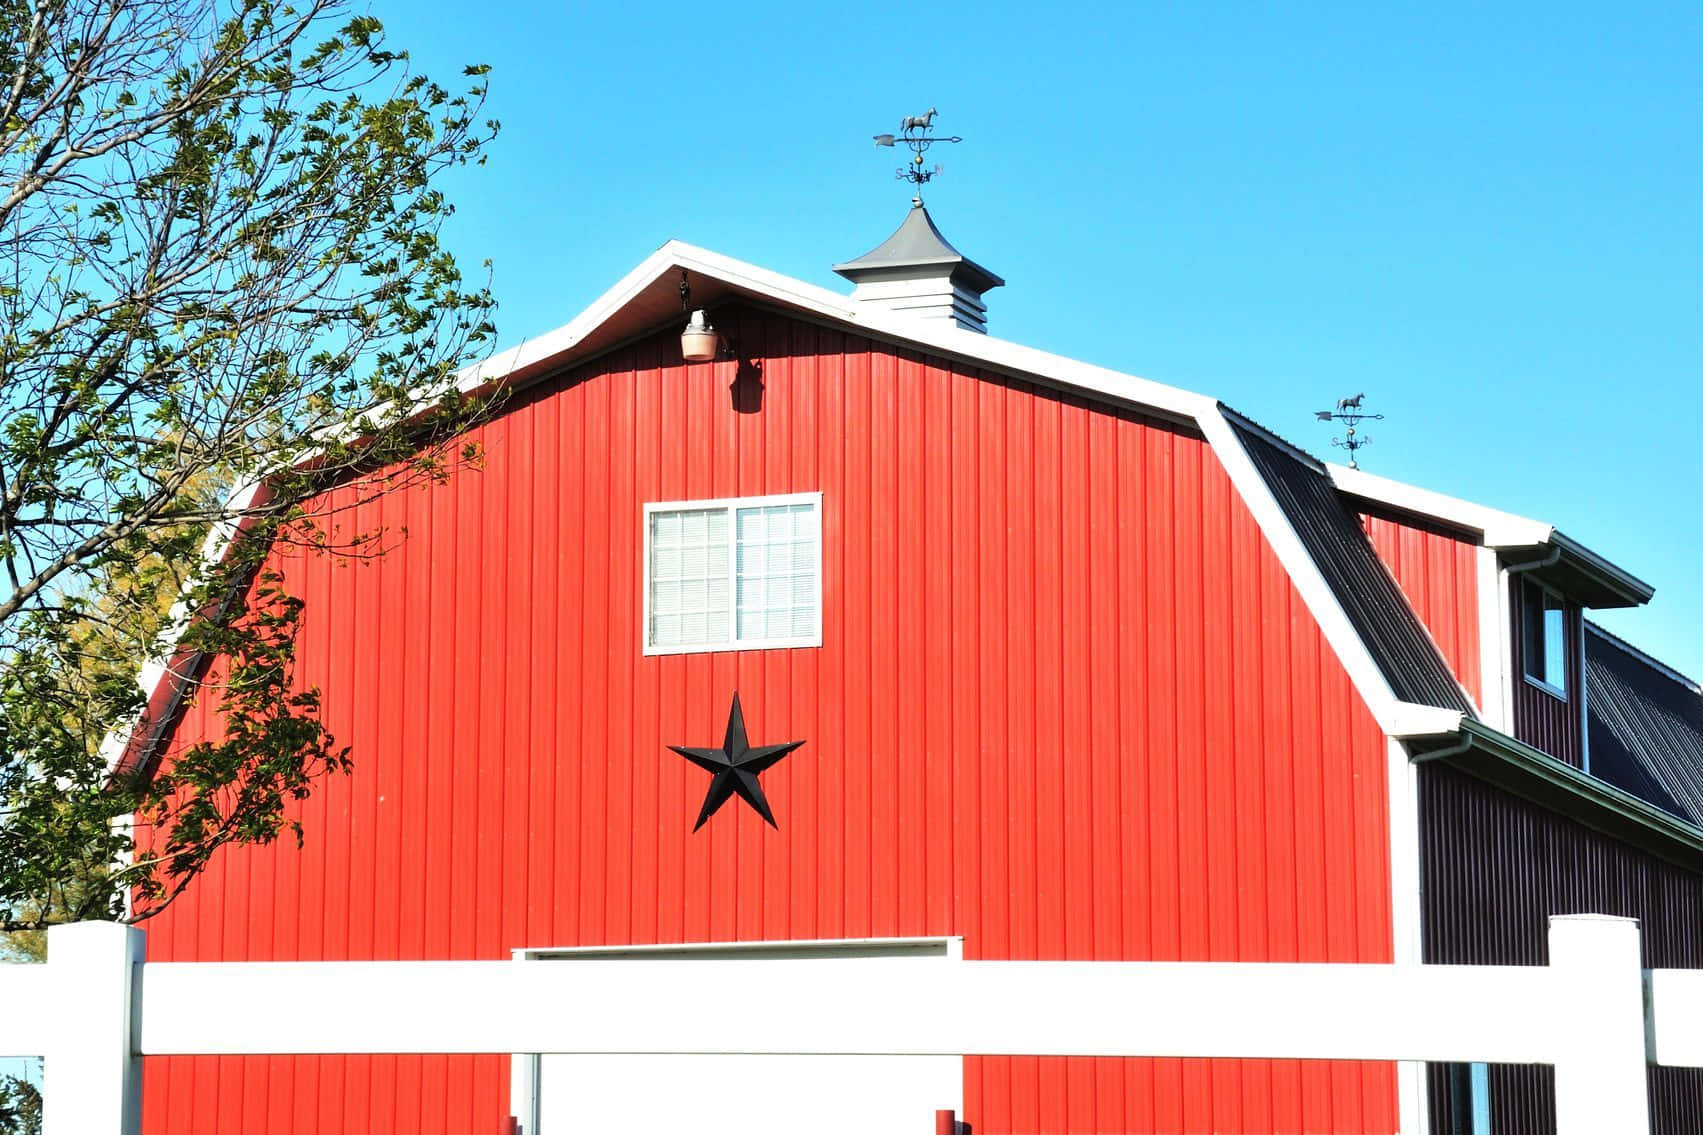 Capture the beauty of rural life with this rustic red barn